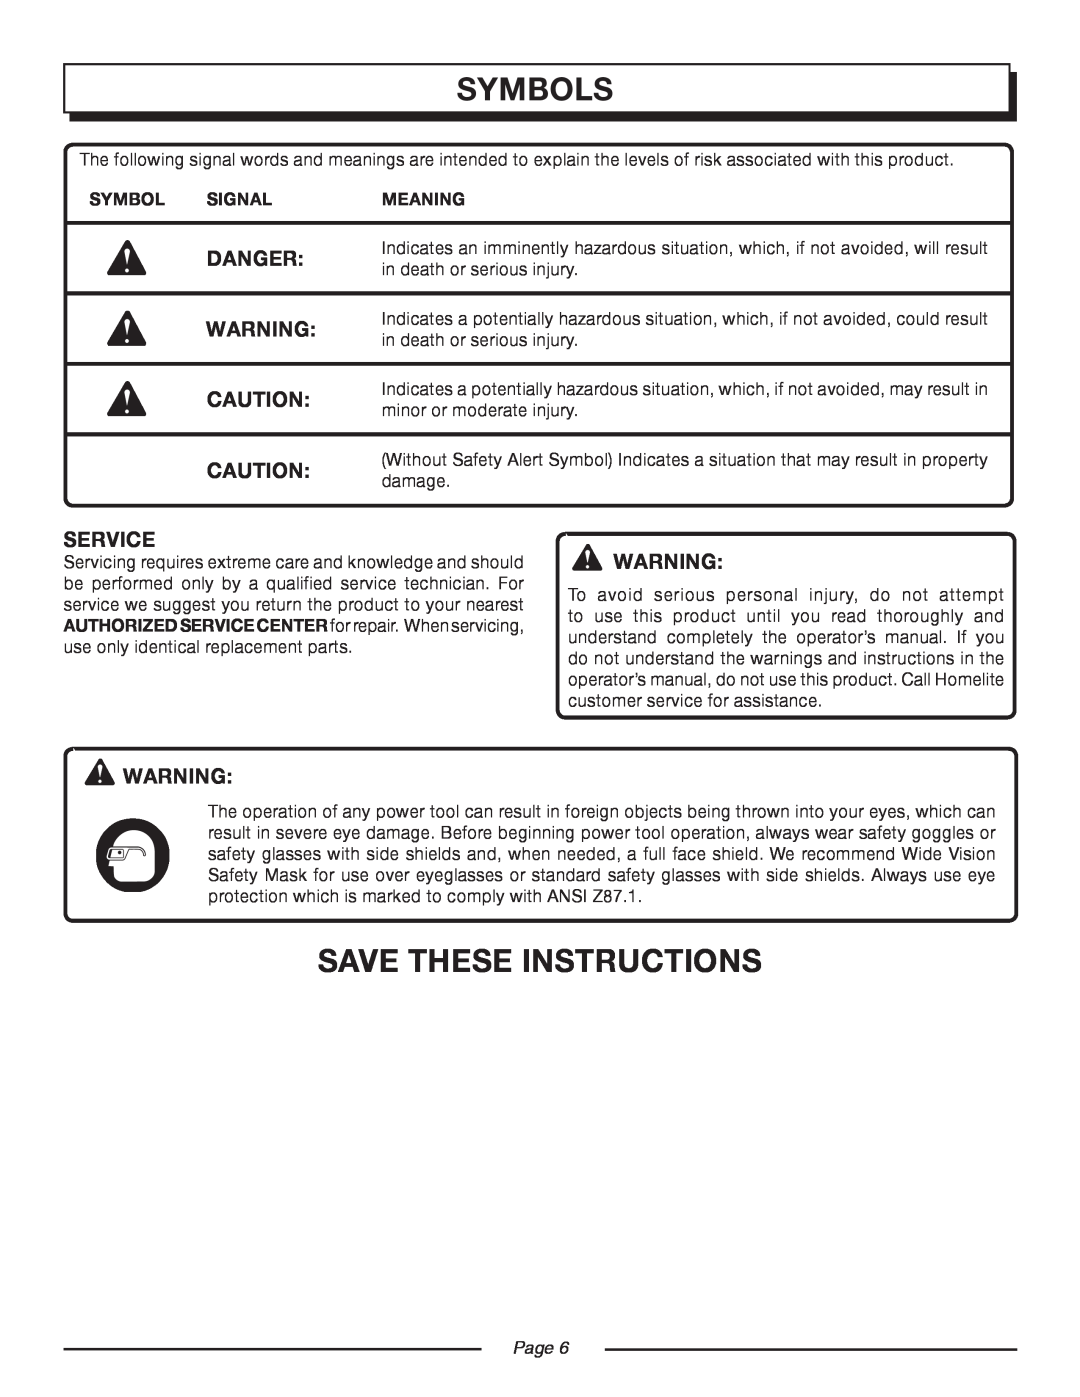 Homelite UT08981, UT08580 manual Save These Instructions, Danger, Service, symbols, Symbol, Signal, Meaning, Page  